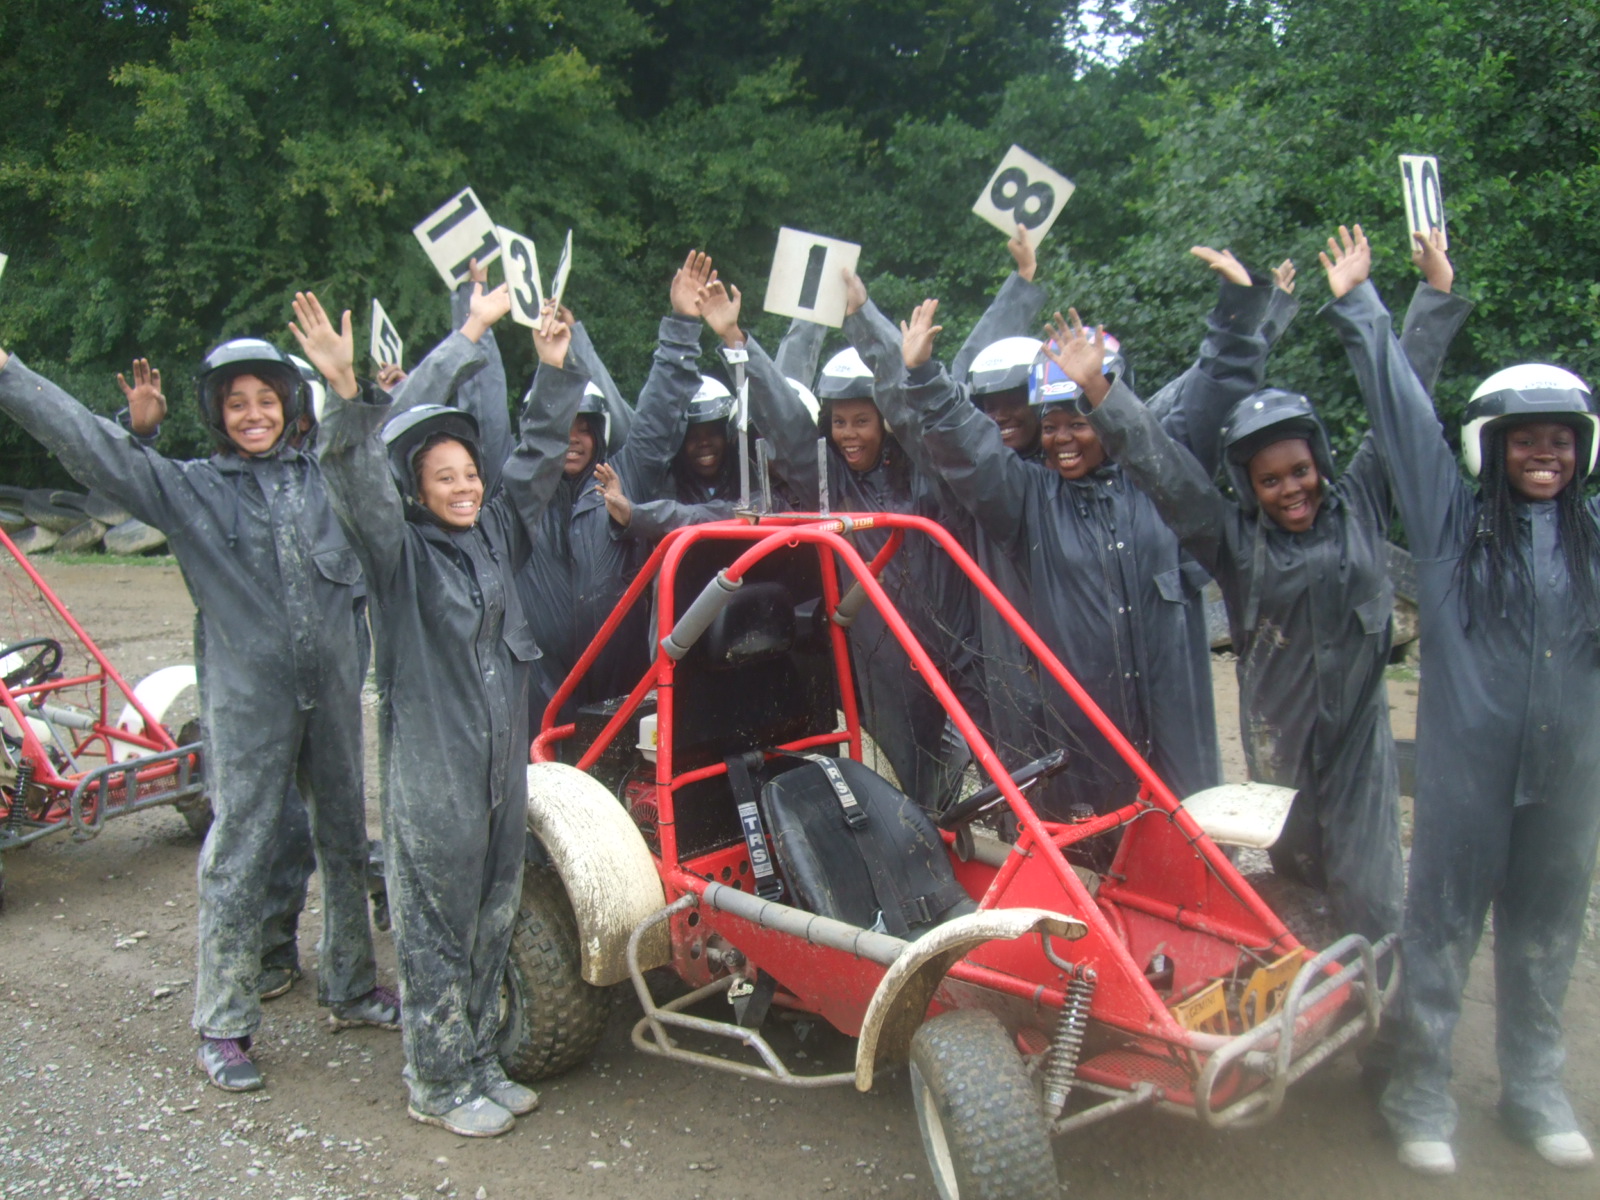 Yanks On Tour at Mid Wales Off Road